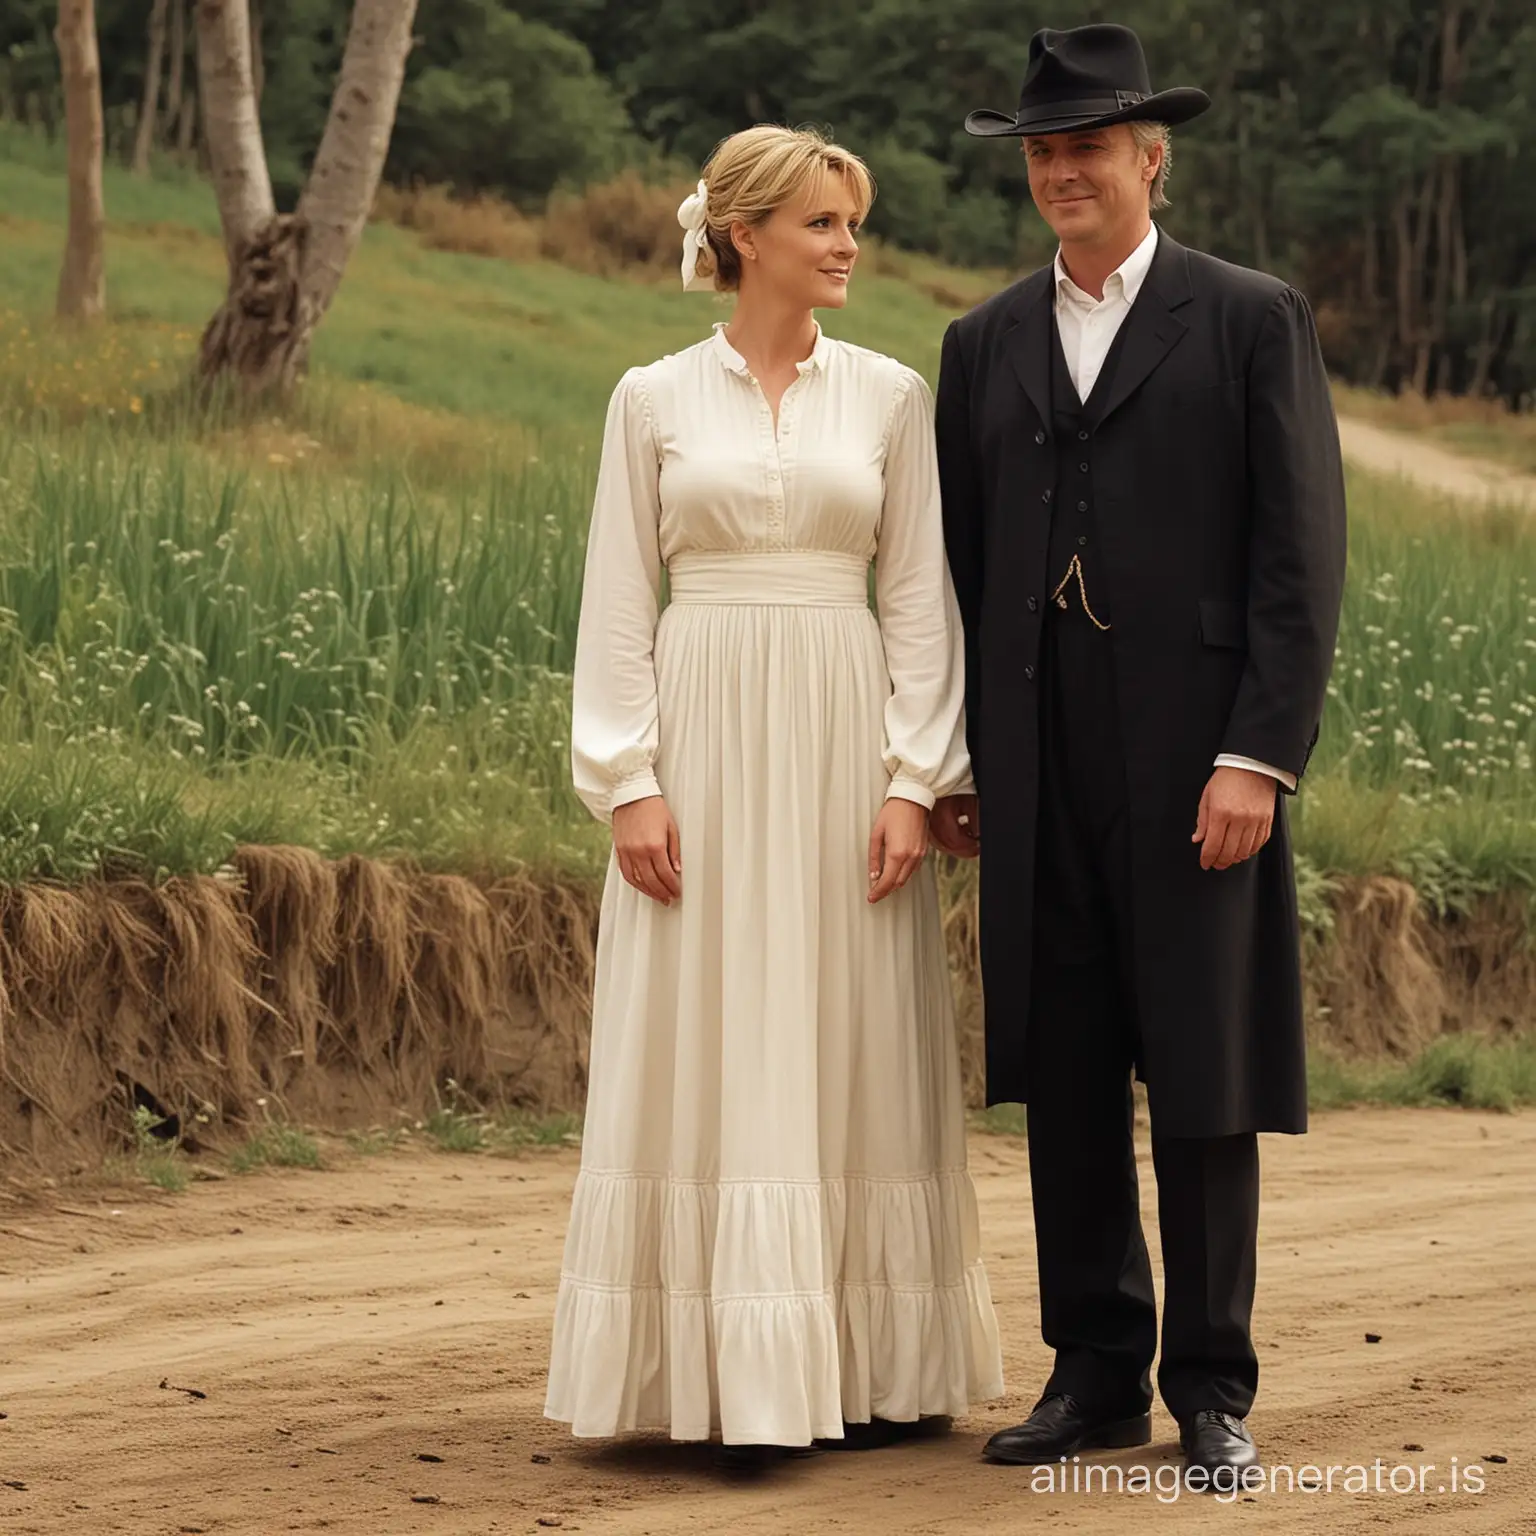 Amanda Tapping as Samantha Carter from SG1 , dressed as a prim and proper Amish wife in a floor-length traditional Amish dress , curtseying demurely in front of her 70-year-old husband